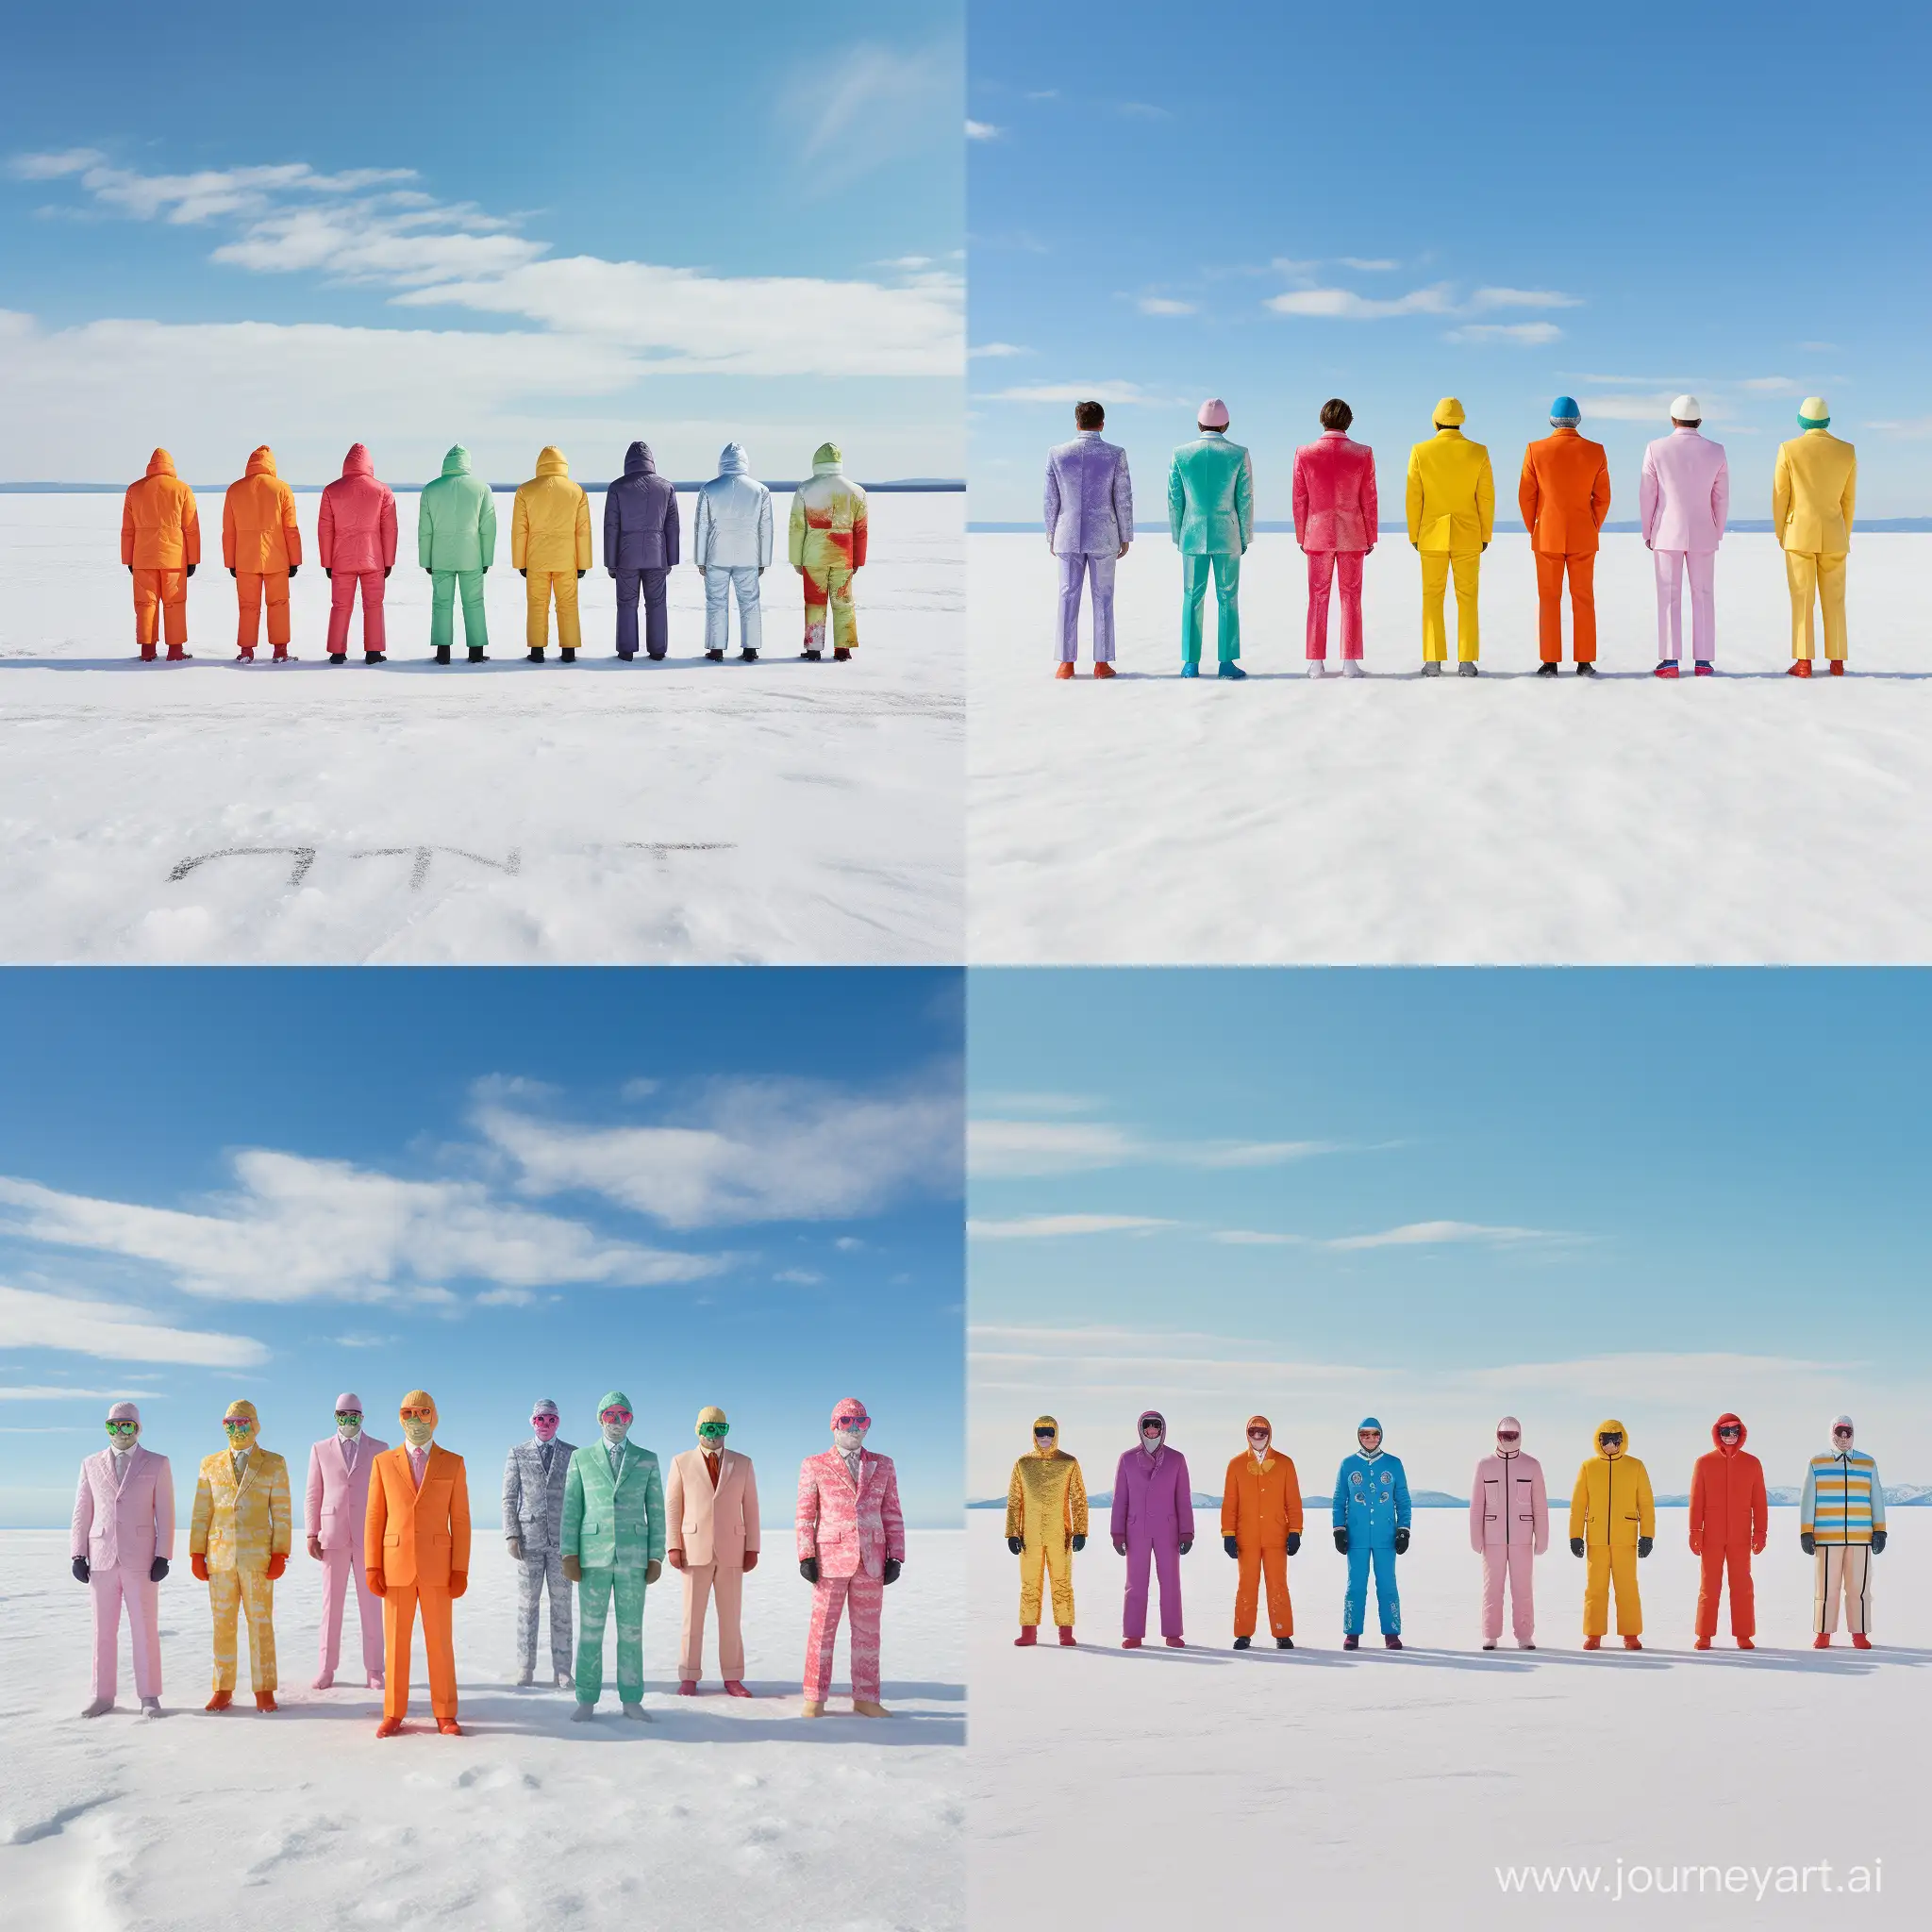 Large expanse of snow 5 people with colored suits that create a contrast